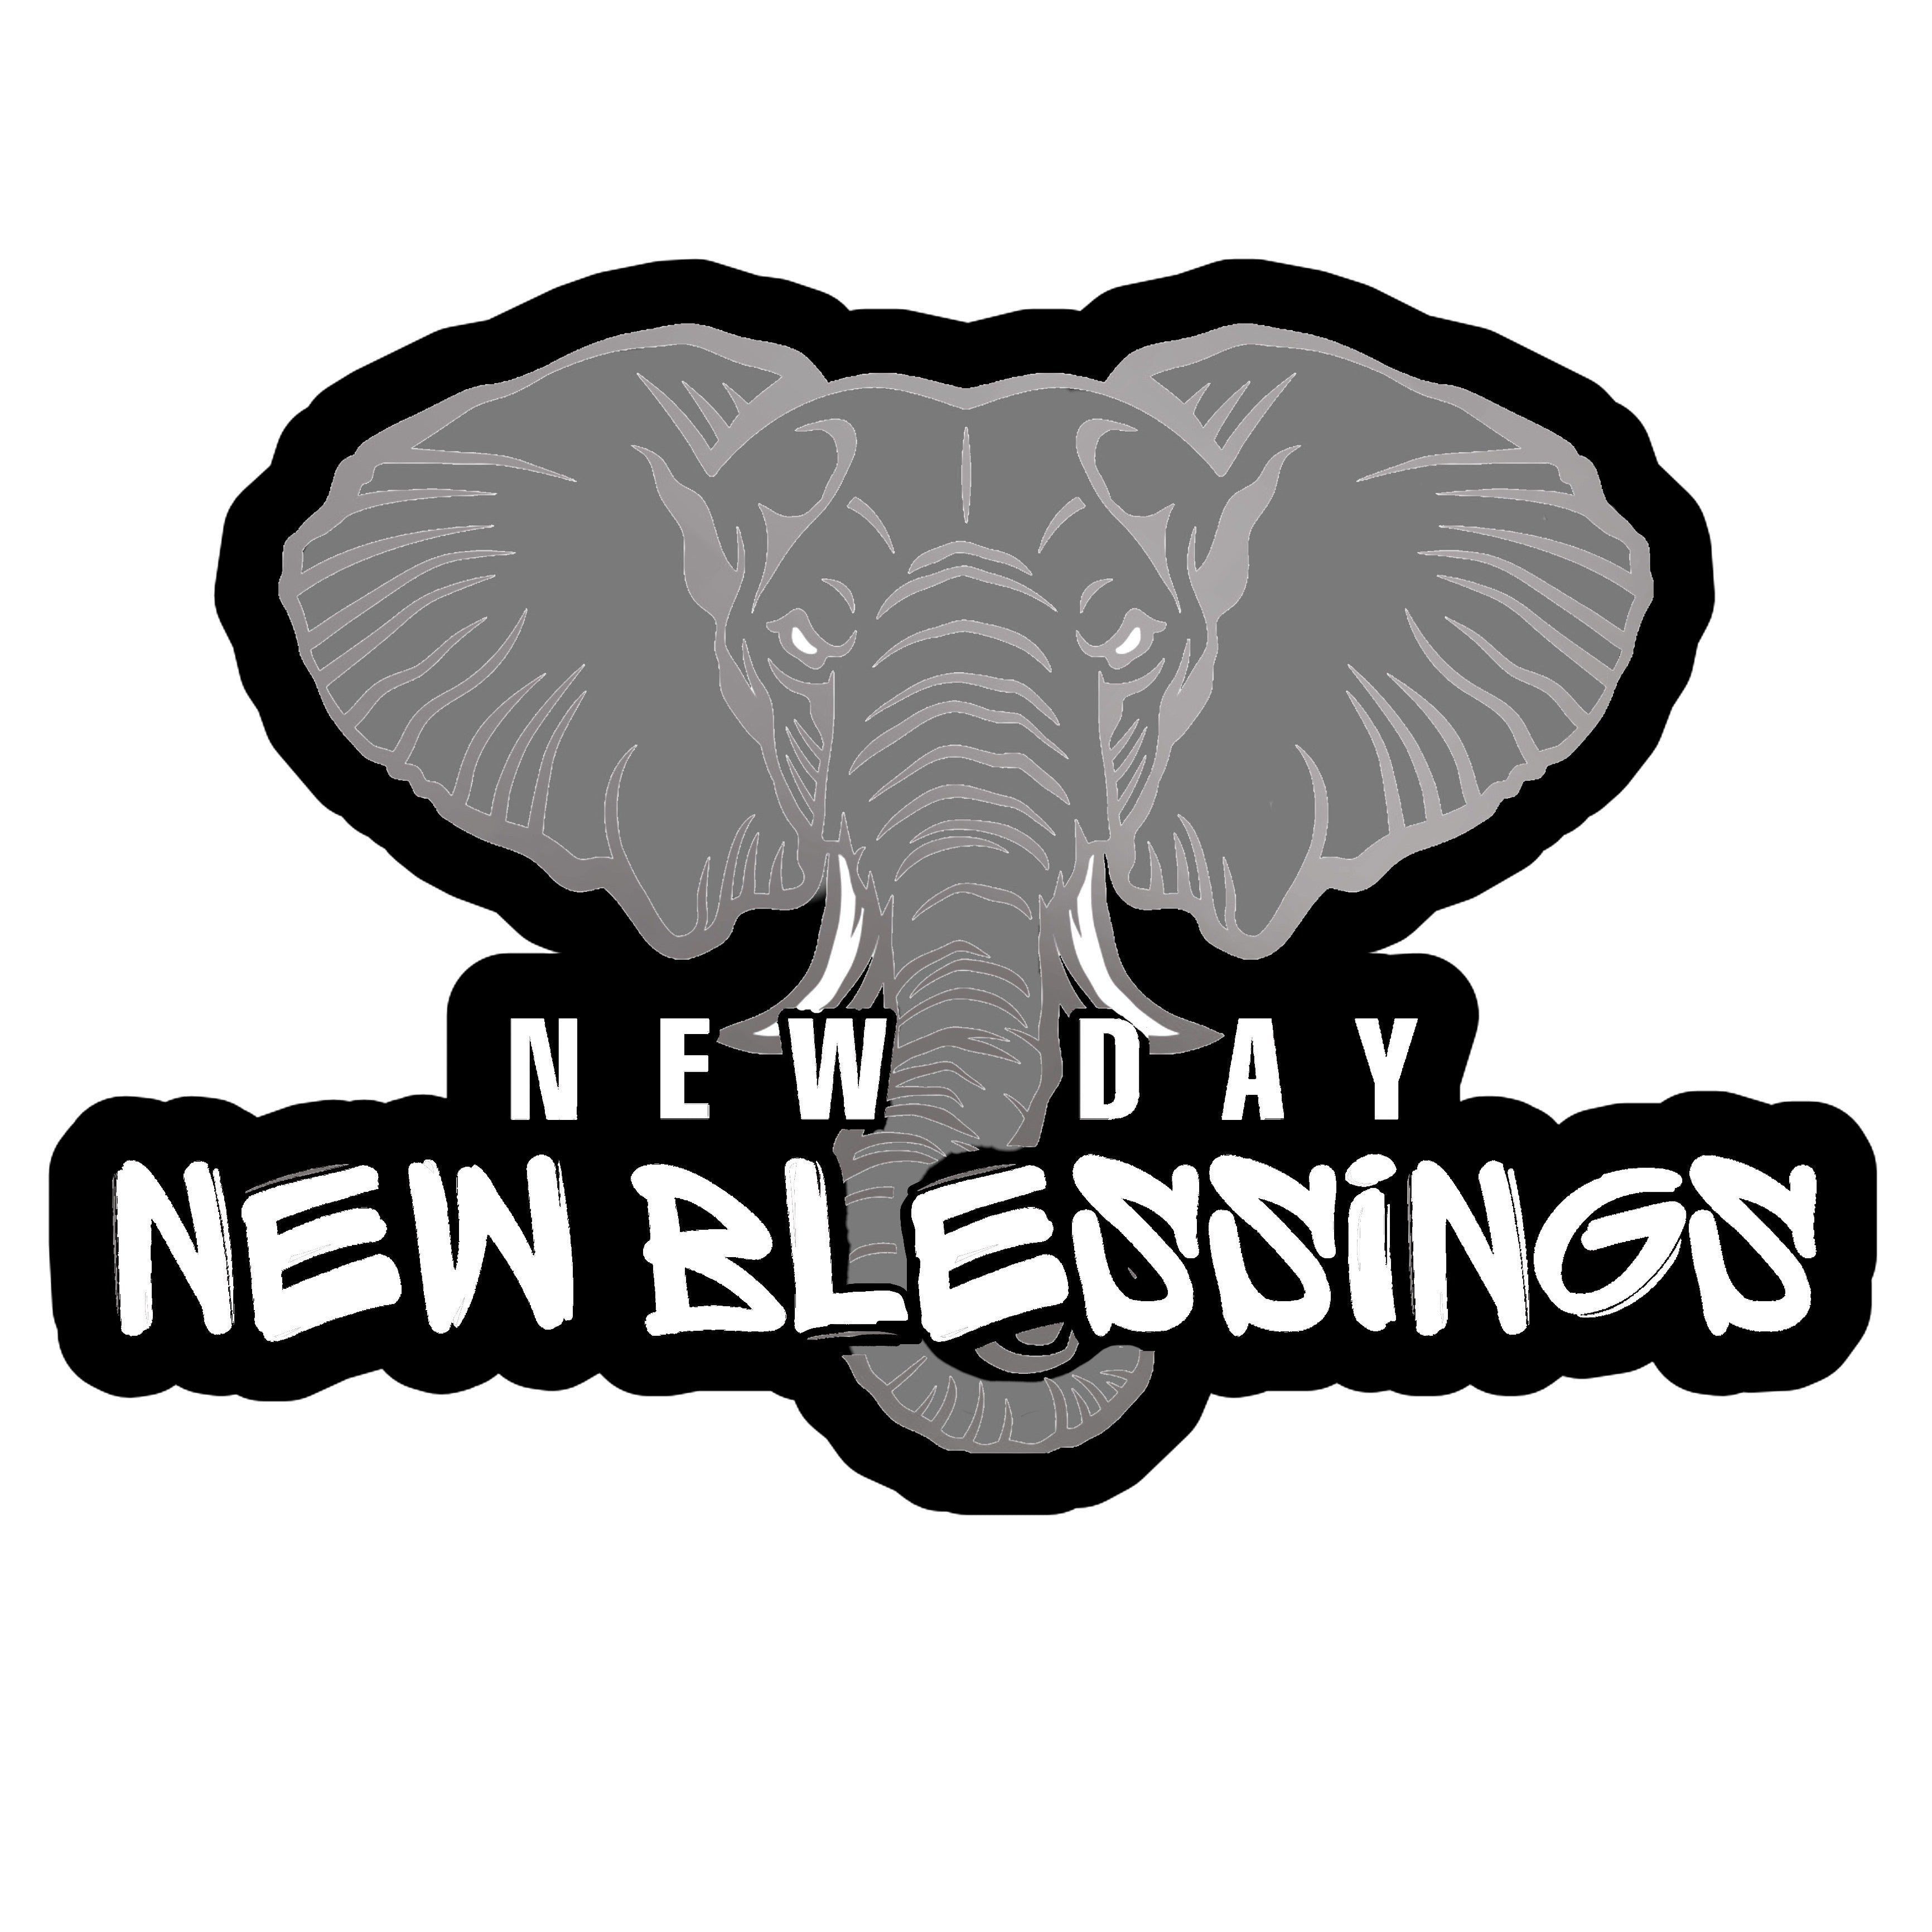 New Day New Blessings Clothing